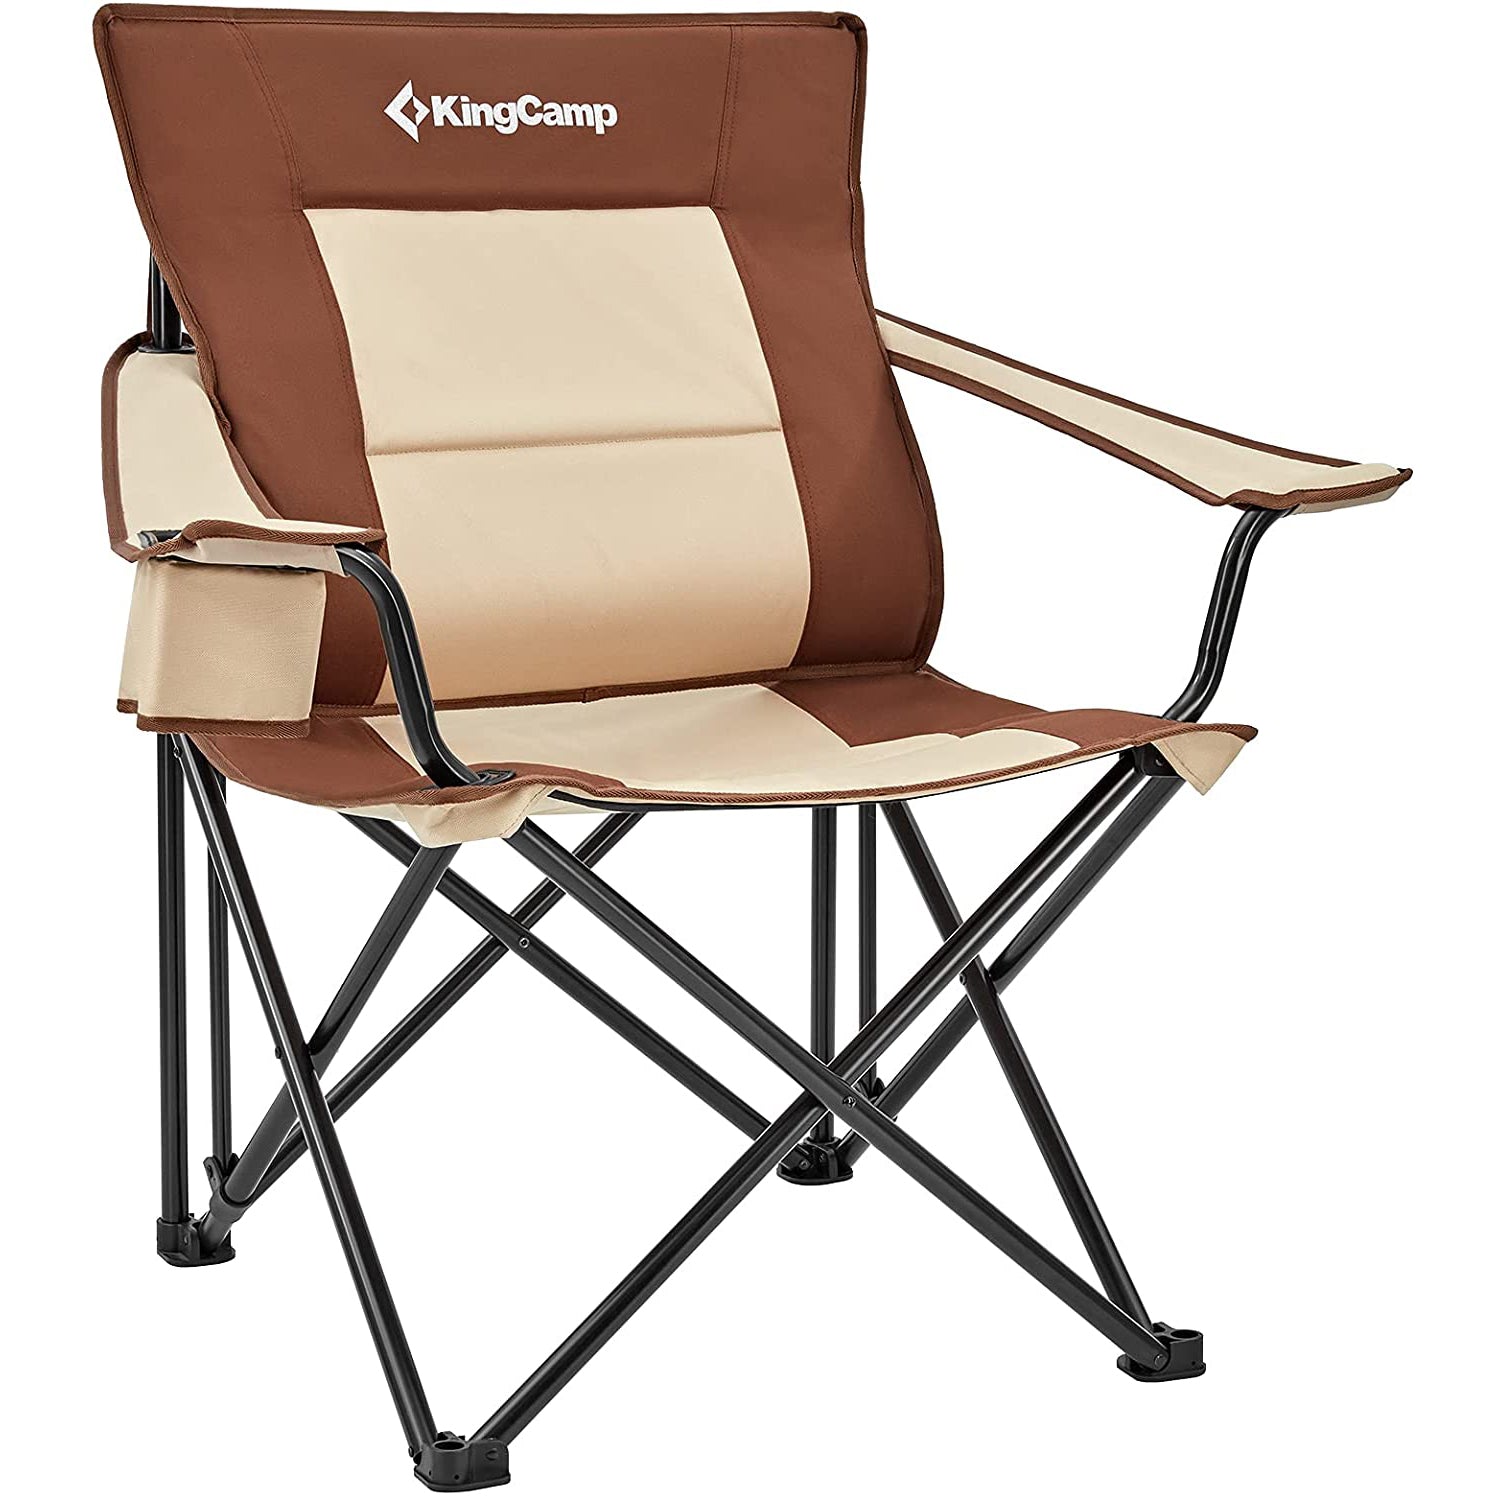 KingCamp Max load 136kg Camping Outdoor Chair